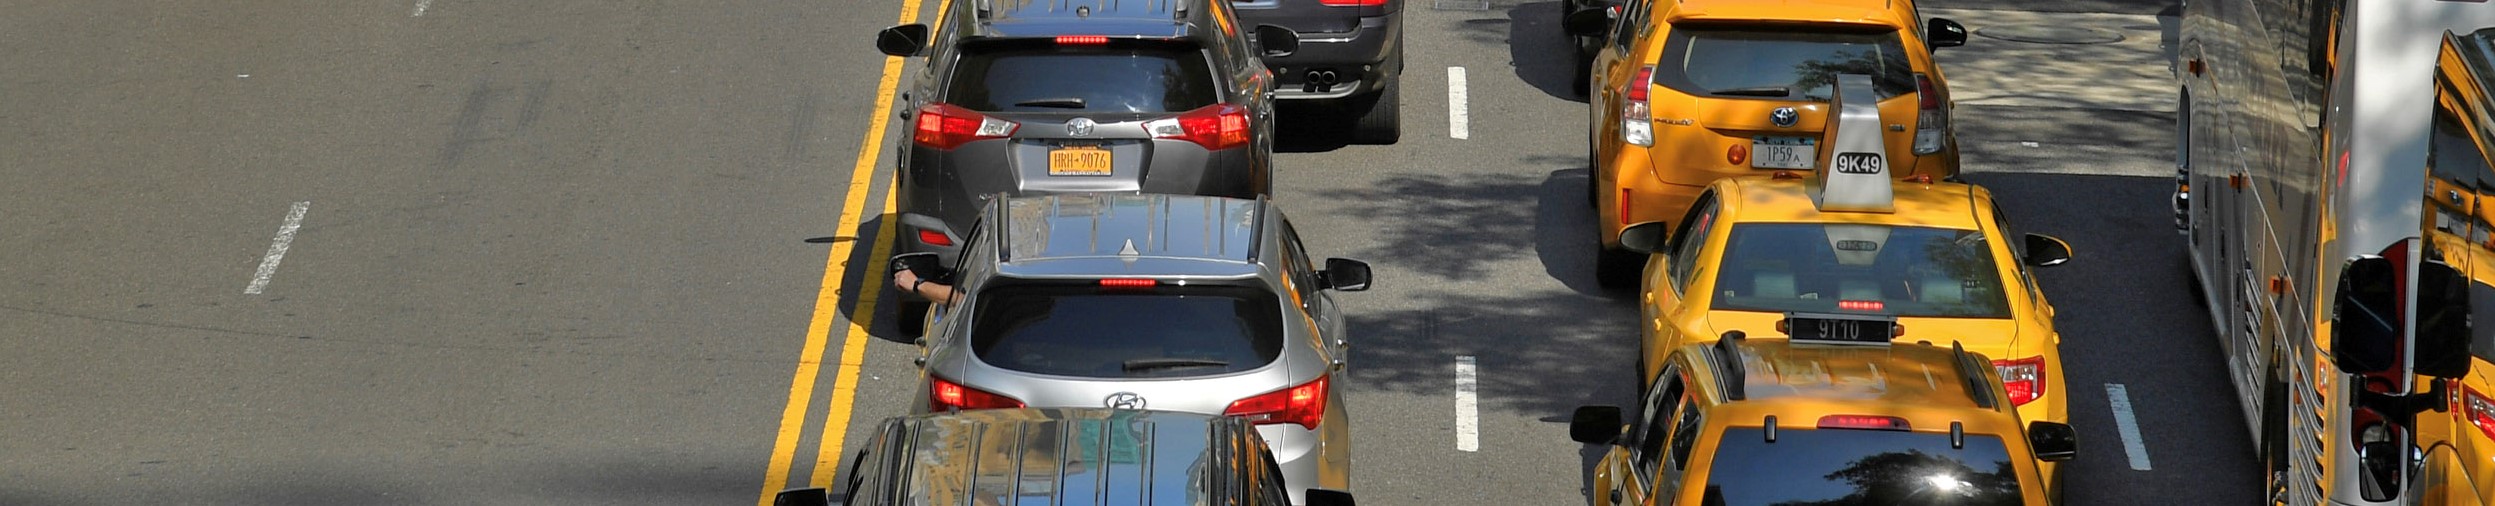 Lines of taxis, private cars and other vehicles sit bumper-to-bumper on a roadway